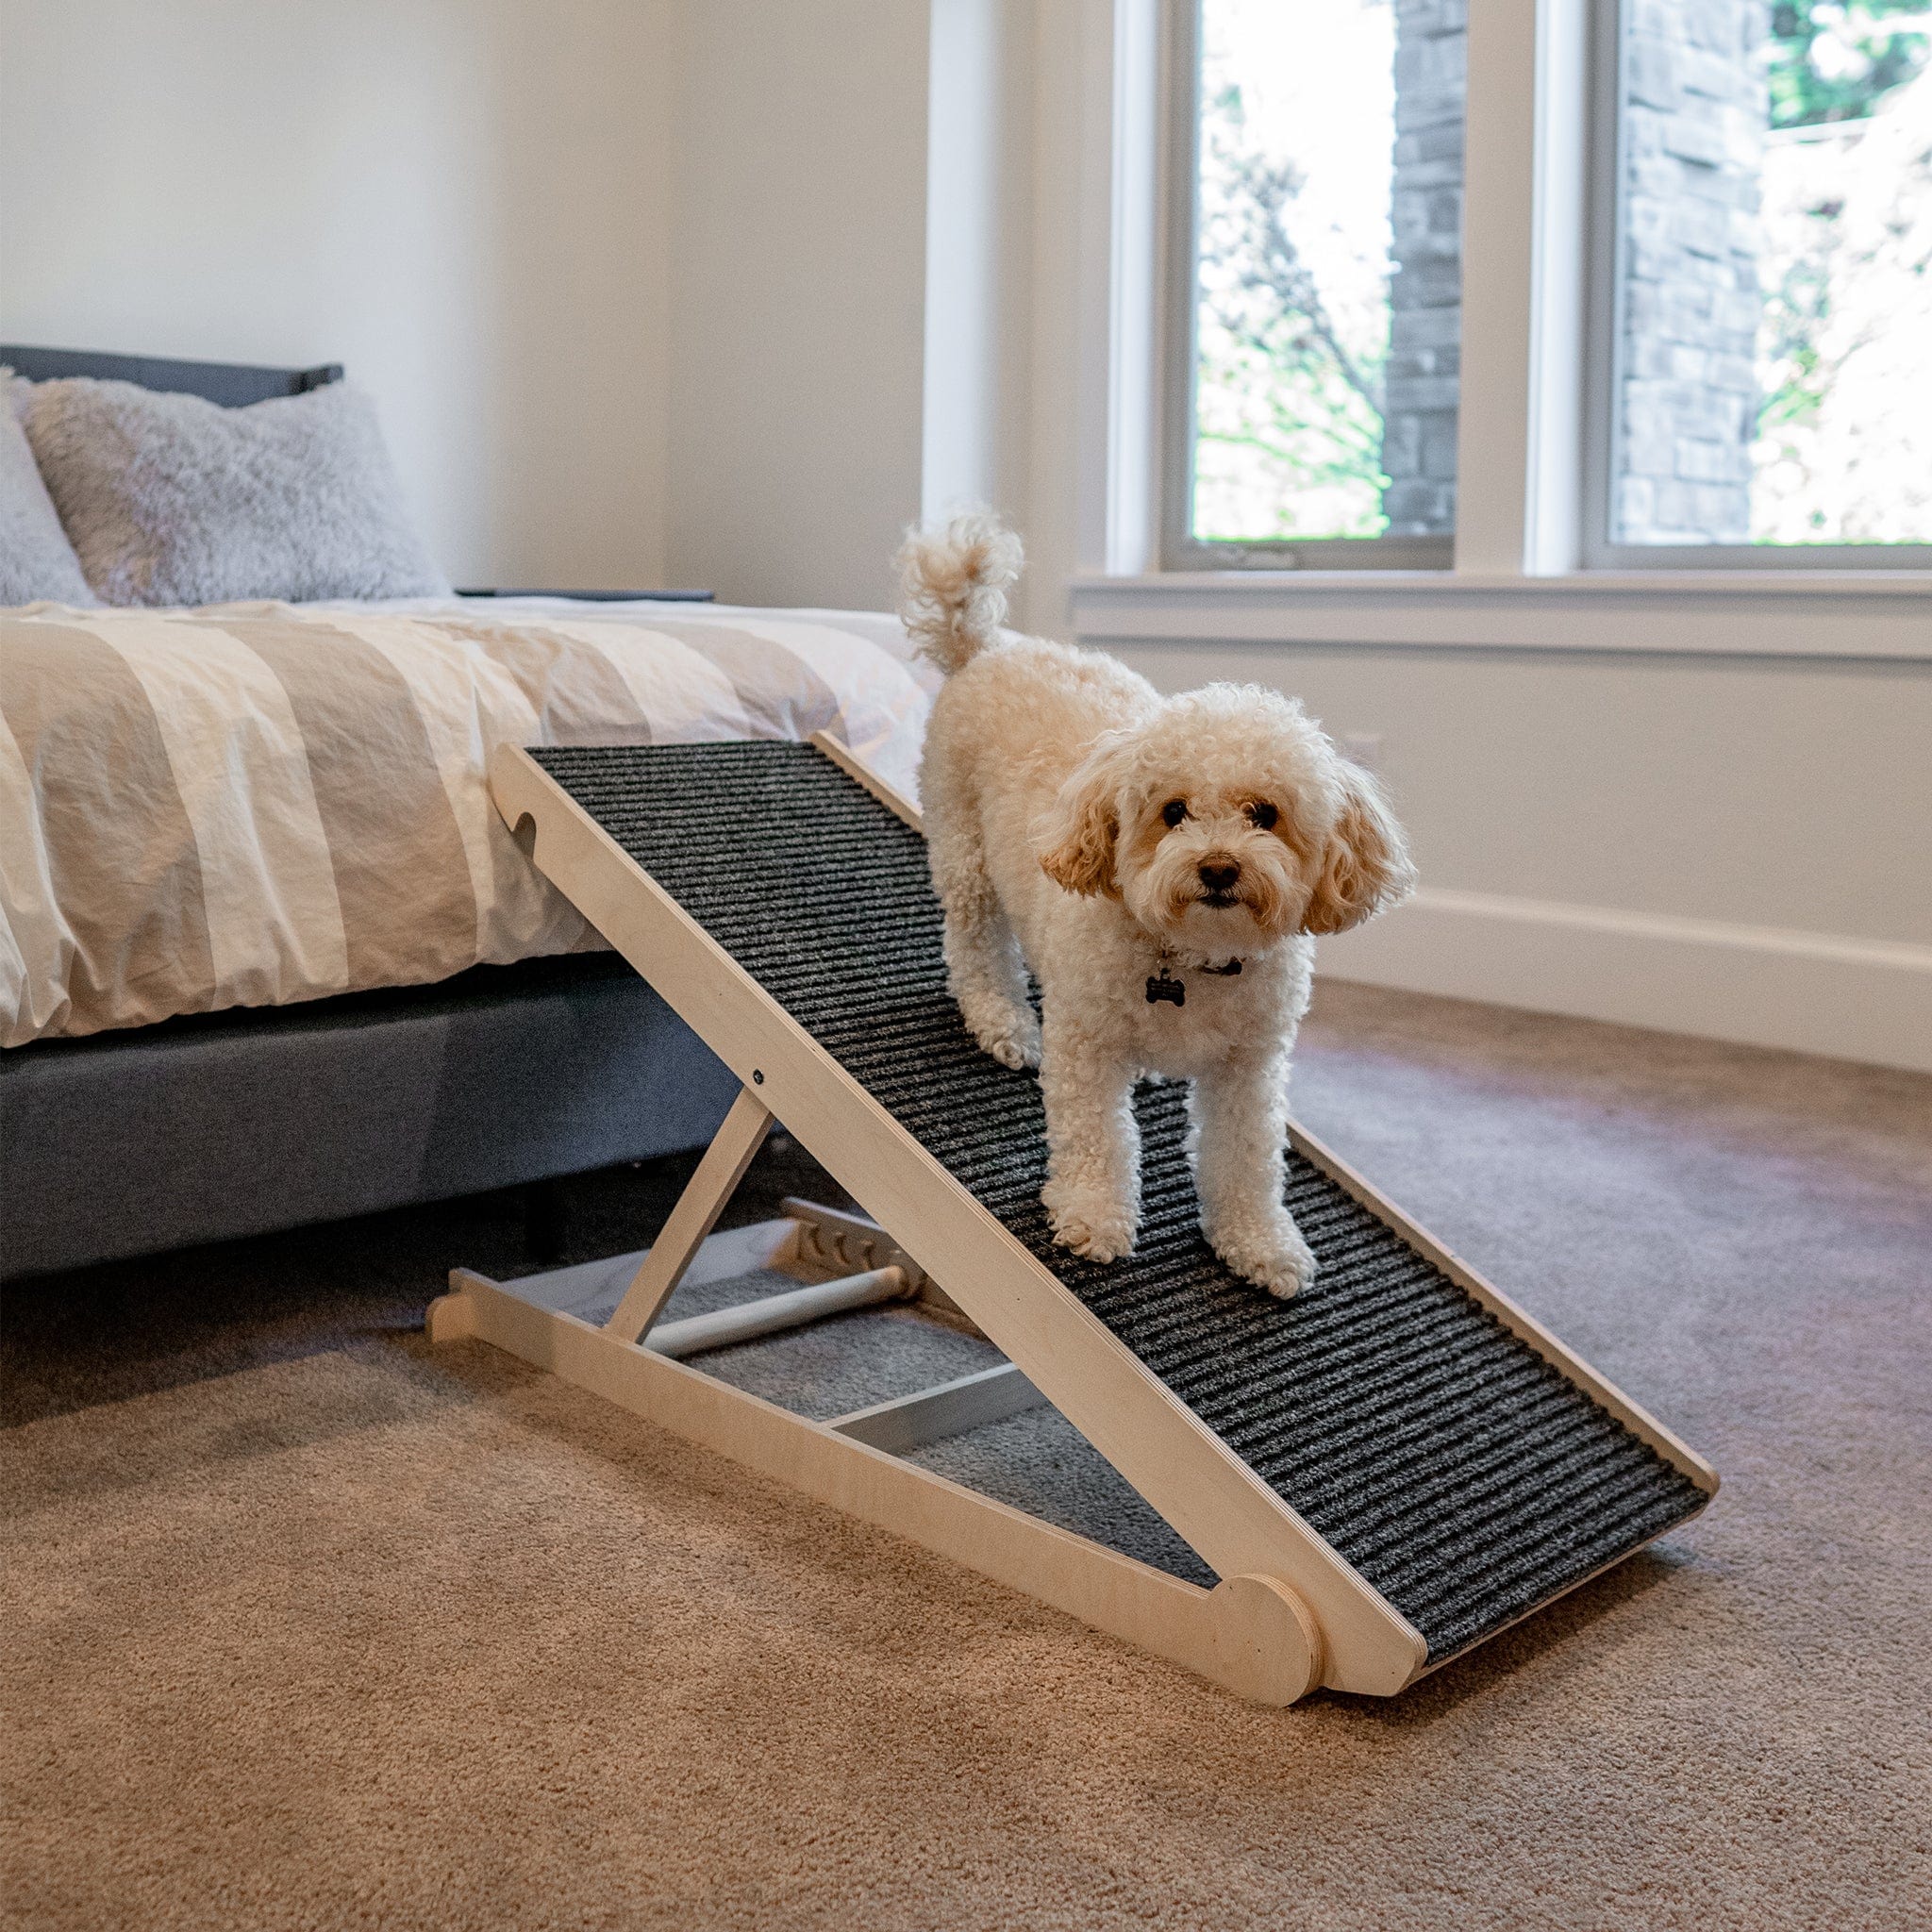 USA Made Dog Ramp For Bed or Couch - Adjustable from 14" to 24" Inches - Holds Over 200LBS -  For Small or Large Dogs